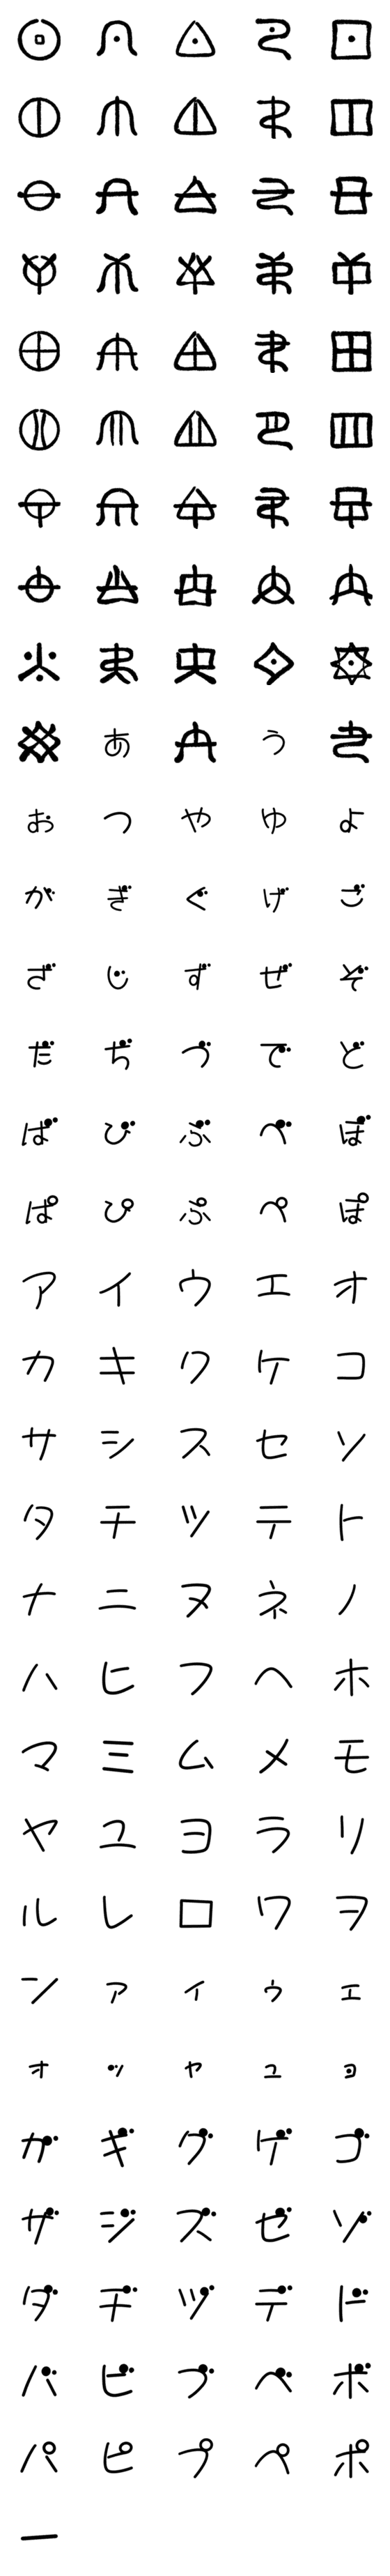 [LINE絵文字]不思議な文字の画像一覧